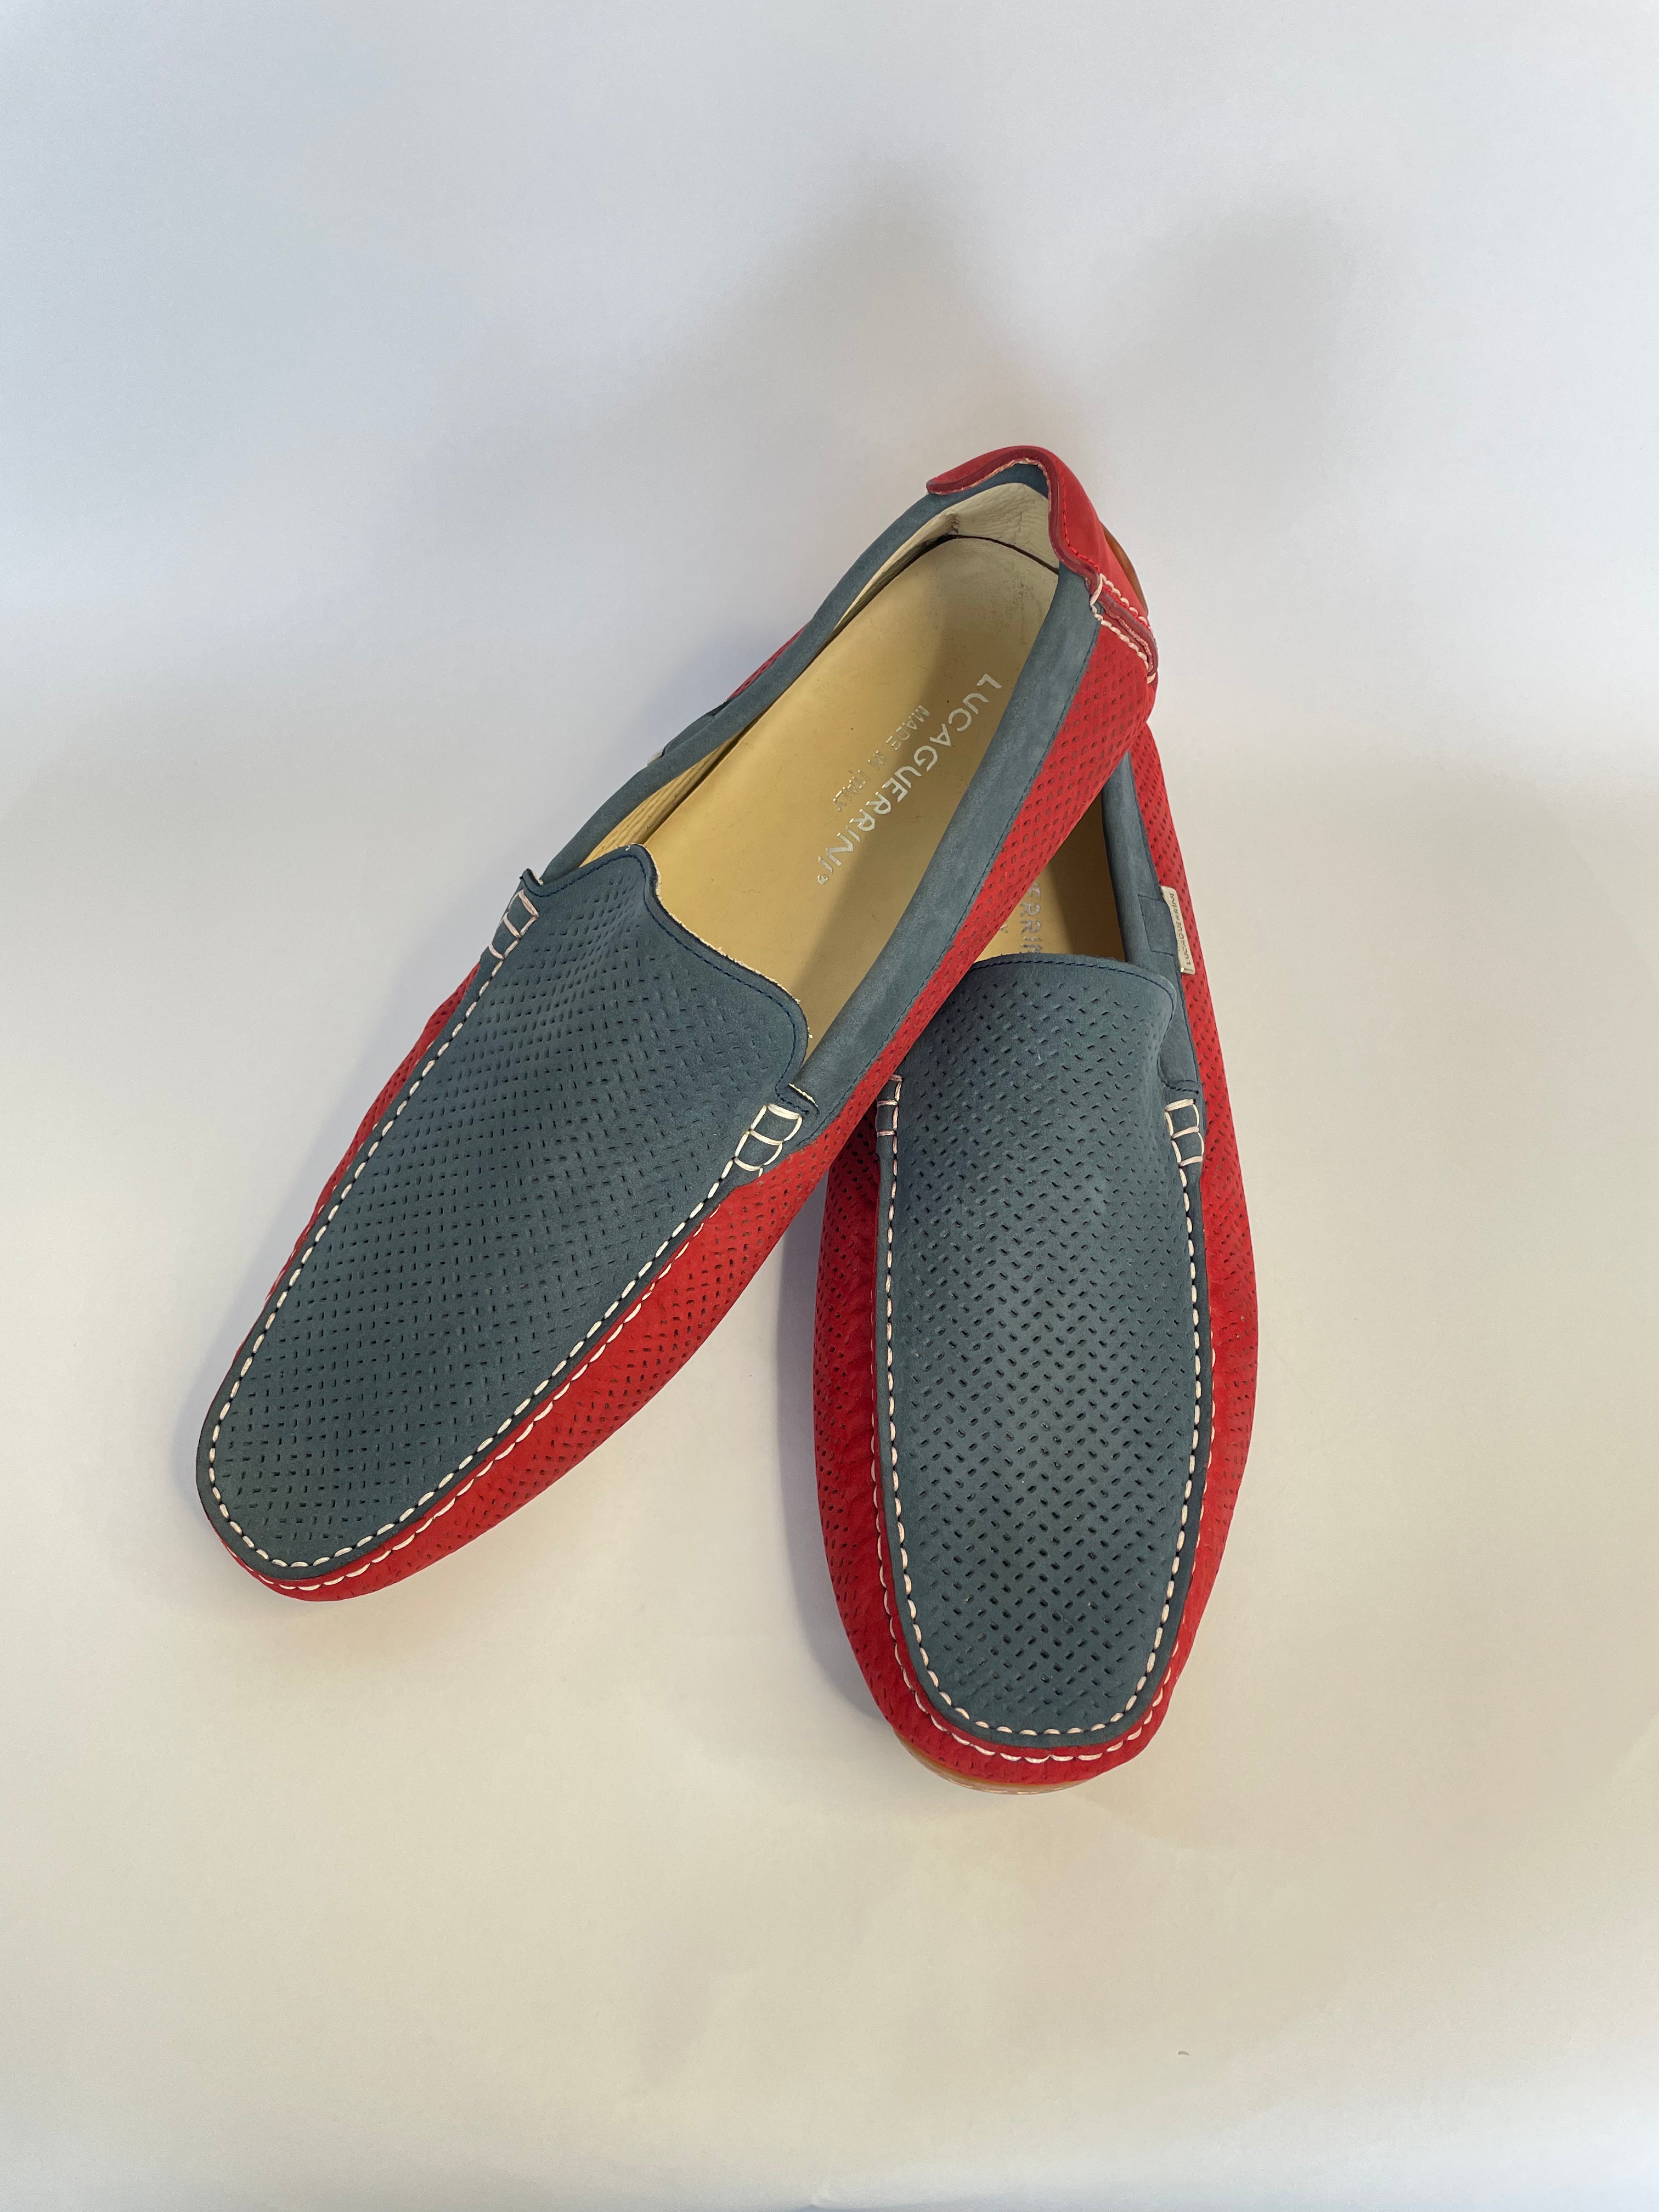 Luca Guerrini Red & Blue Loafers